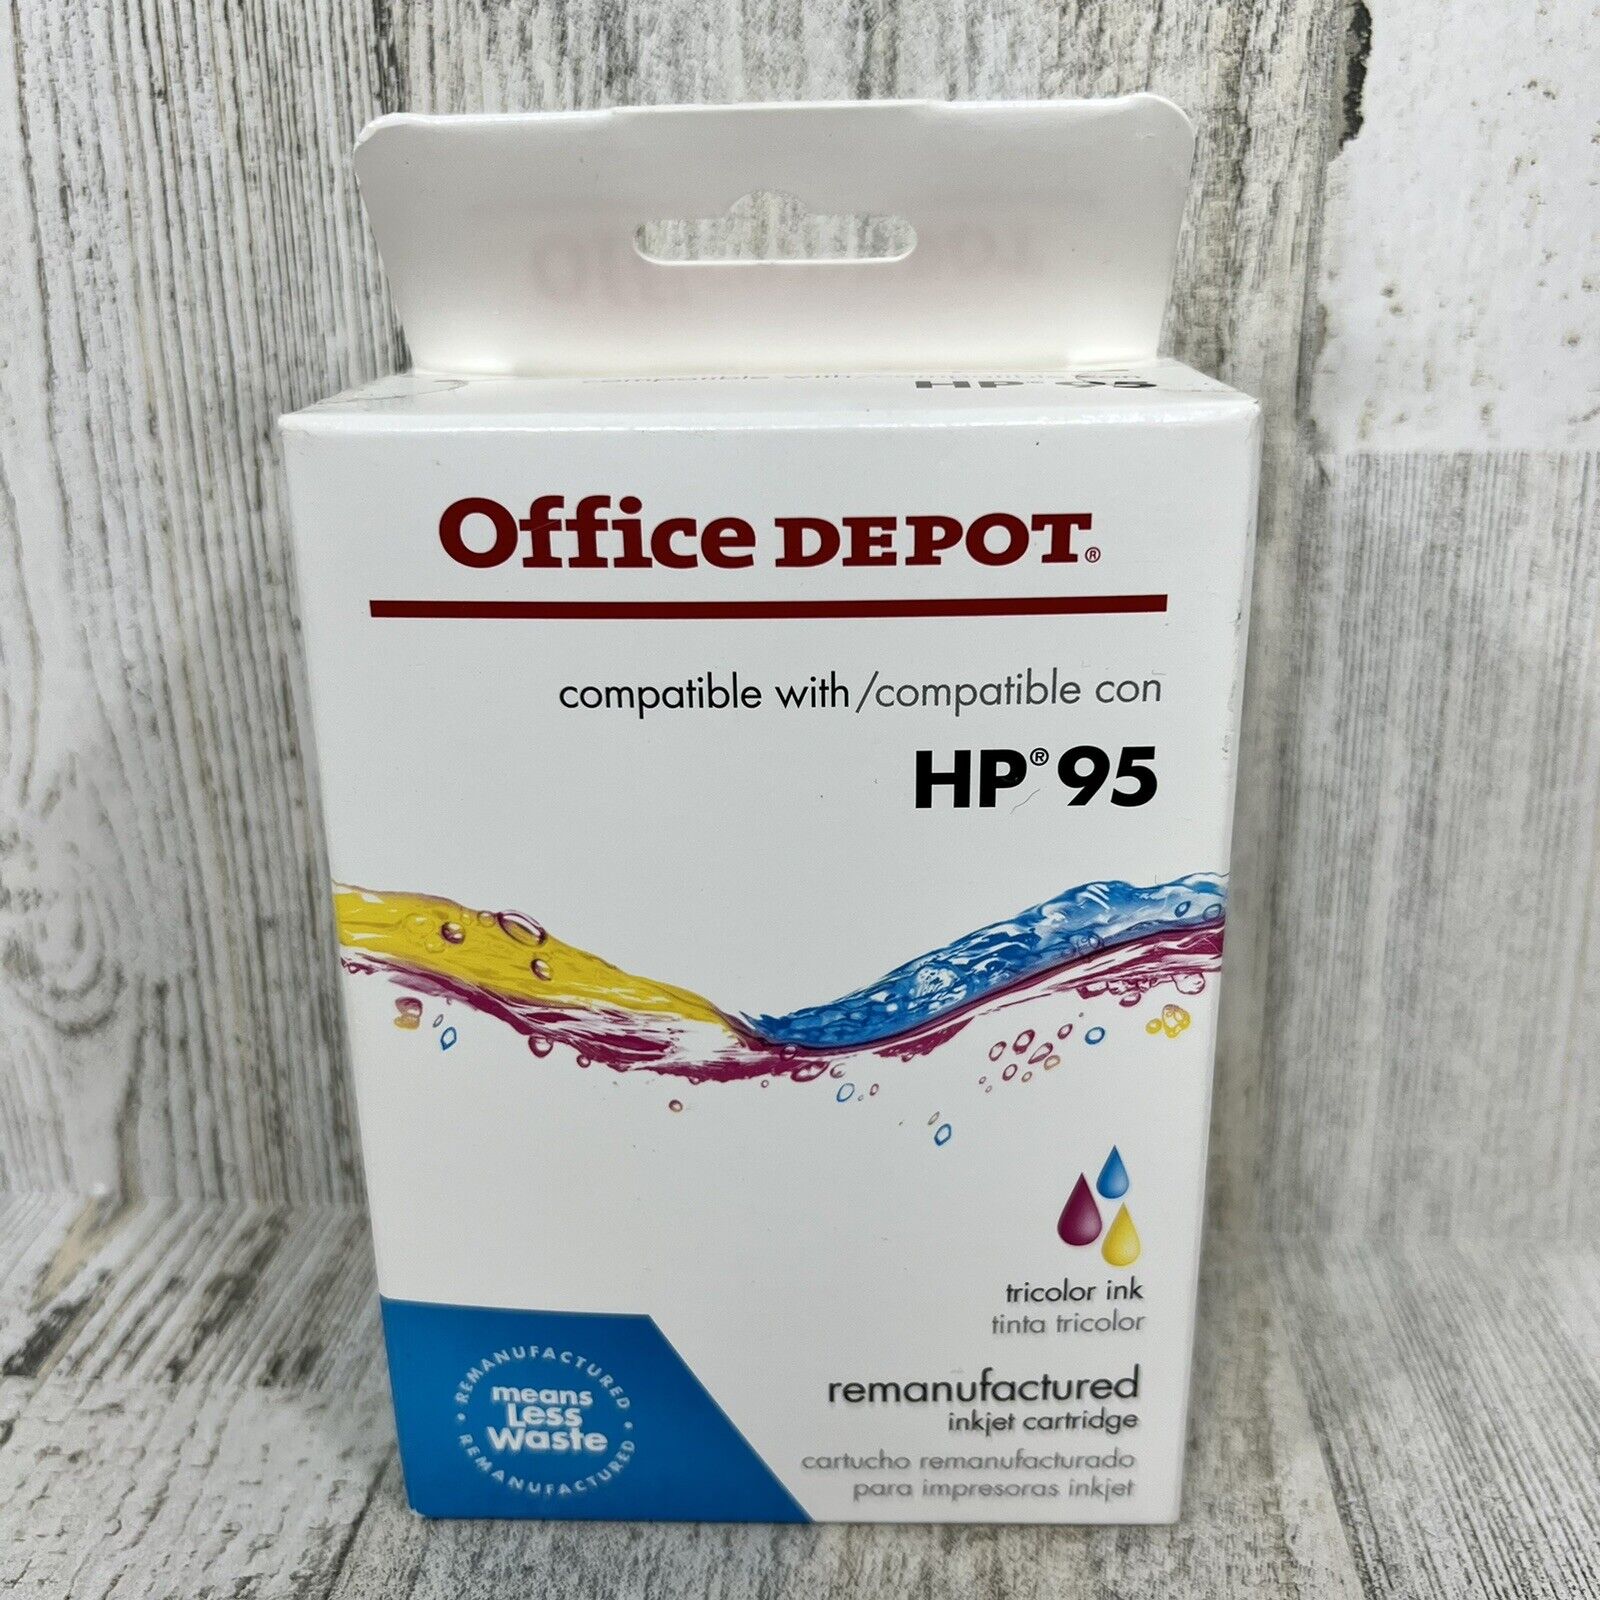 Office Depot Remanufactured Inkjet Cartridge for HP 95 Tricolor - NEW